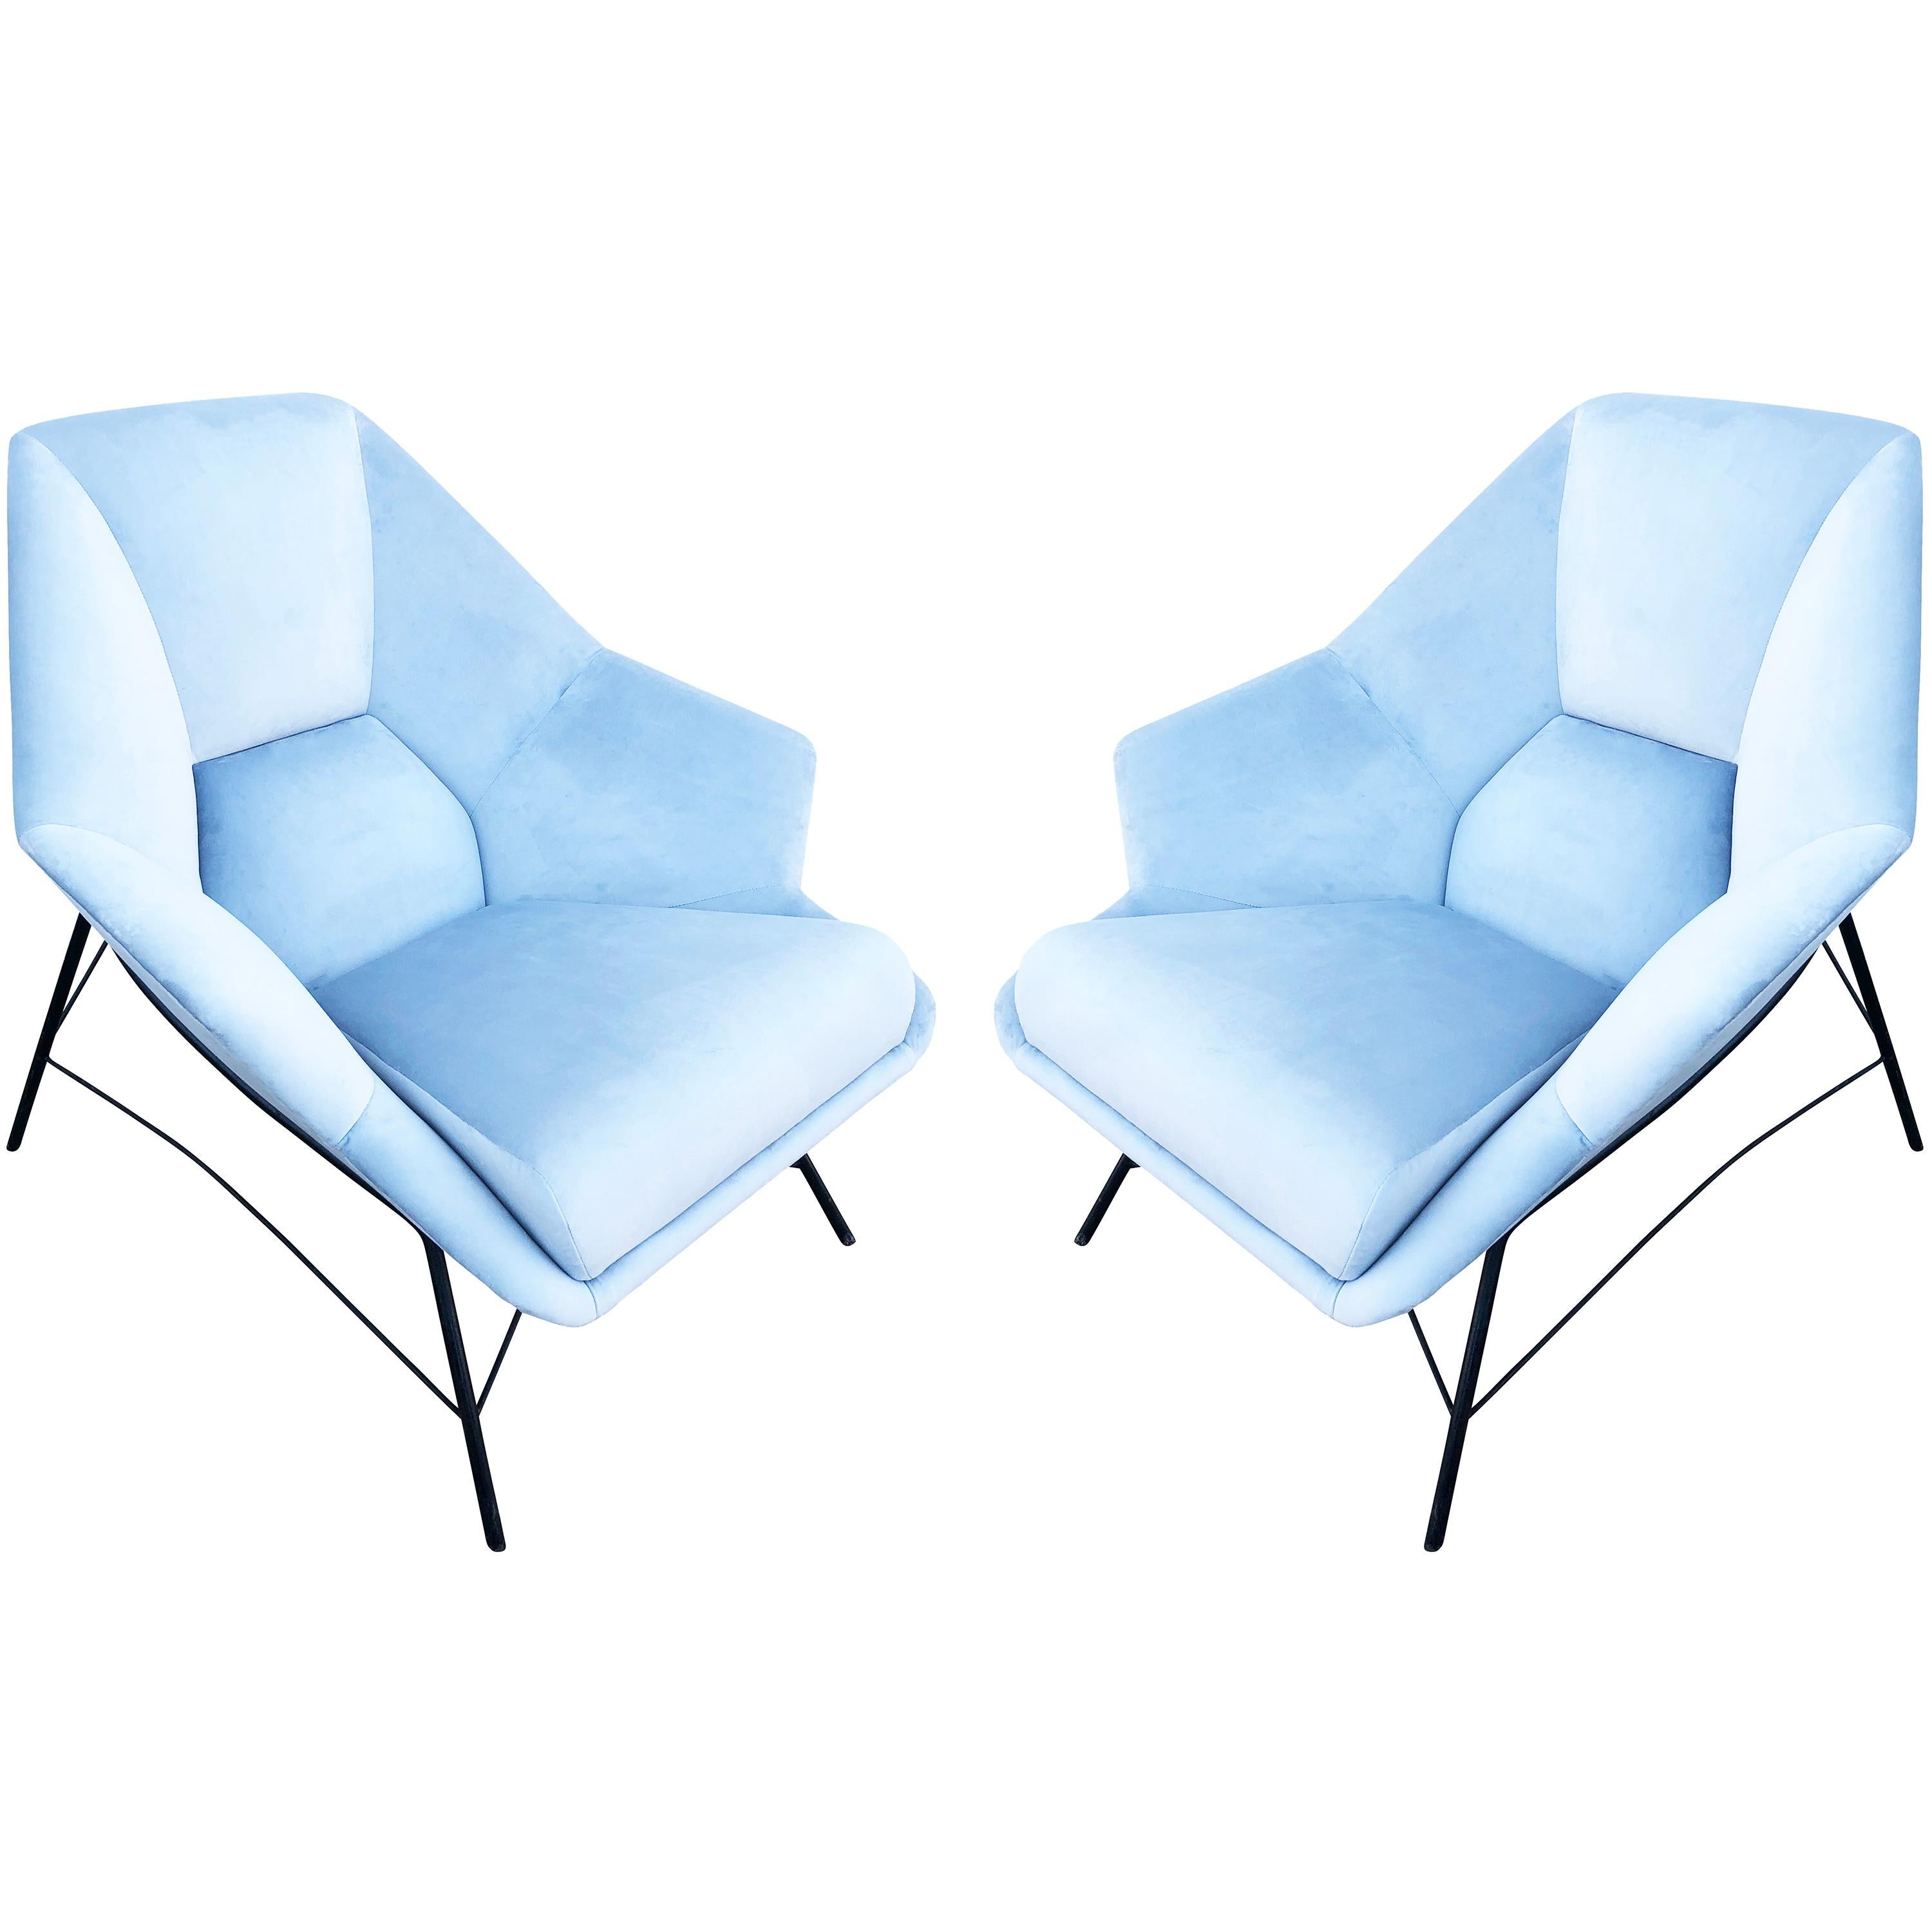 Pair of Sculptural Italian Lounge Chairs, 1960s